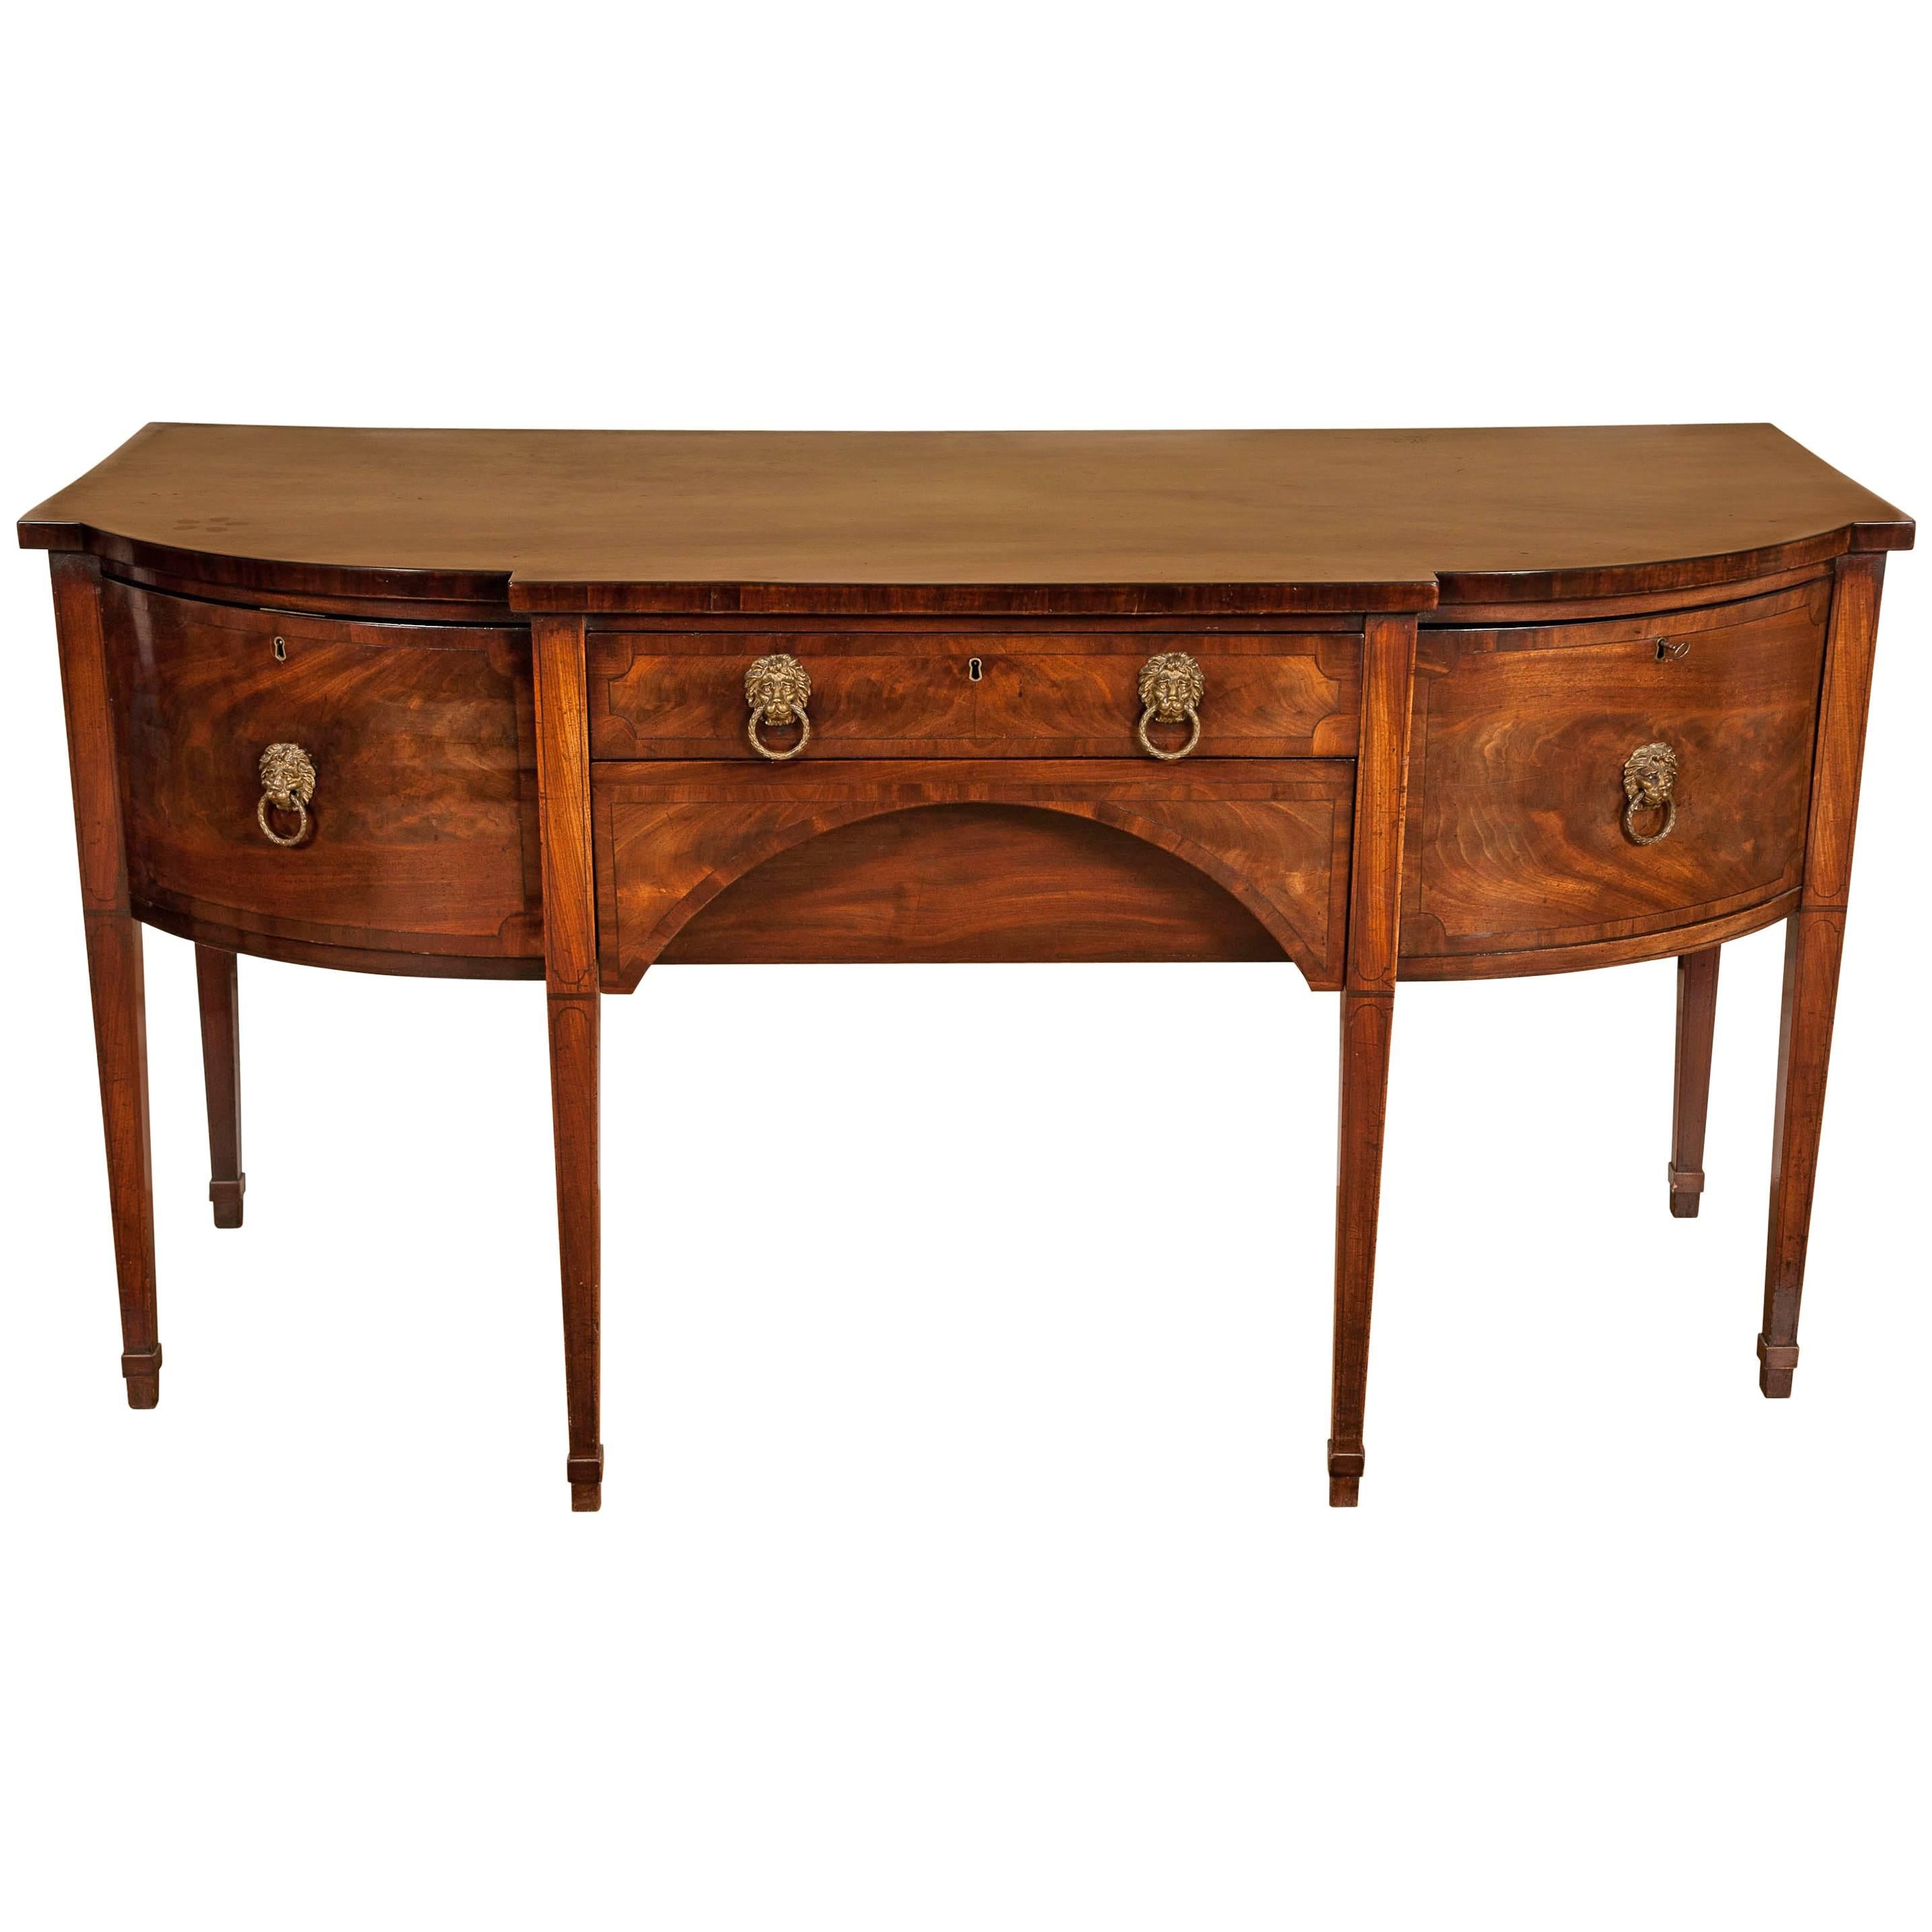 18th century George III Period Mahogany Sideboard For Sale